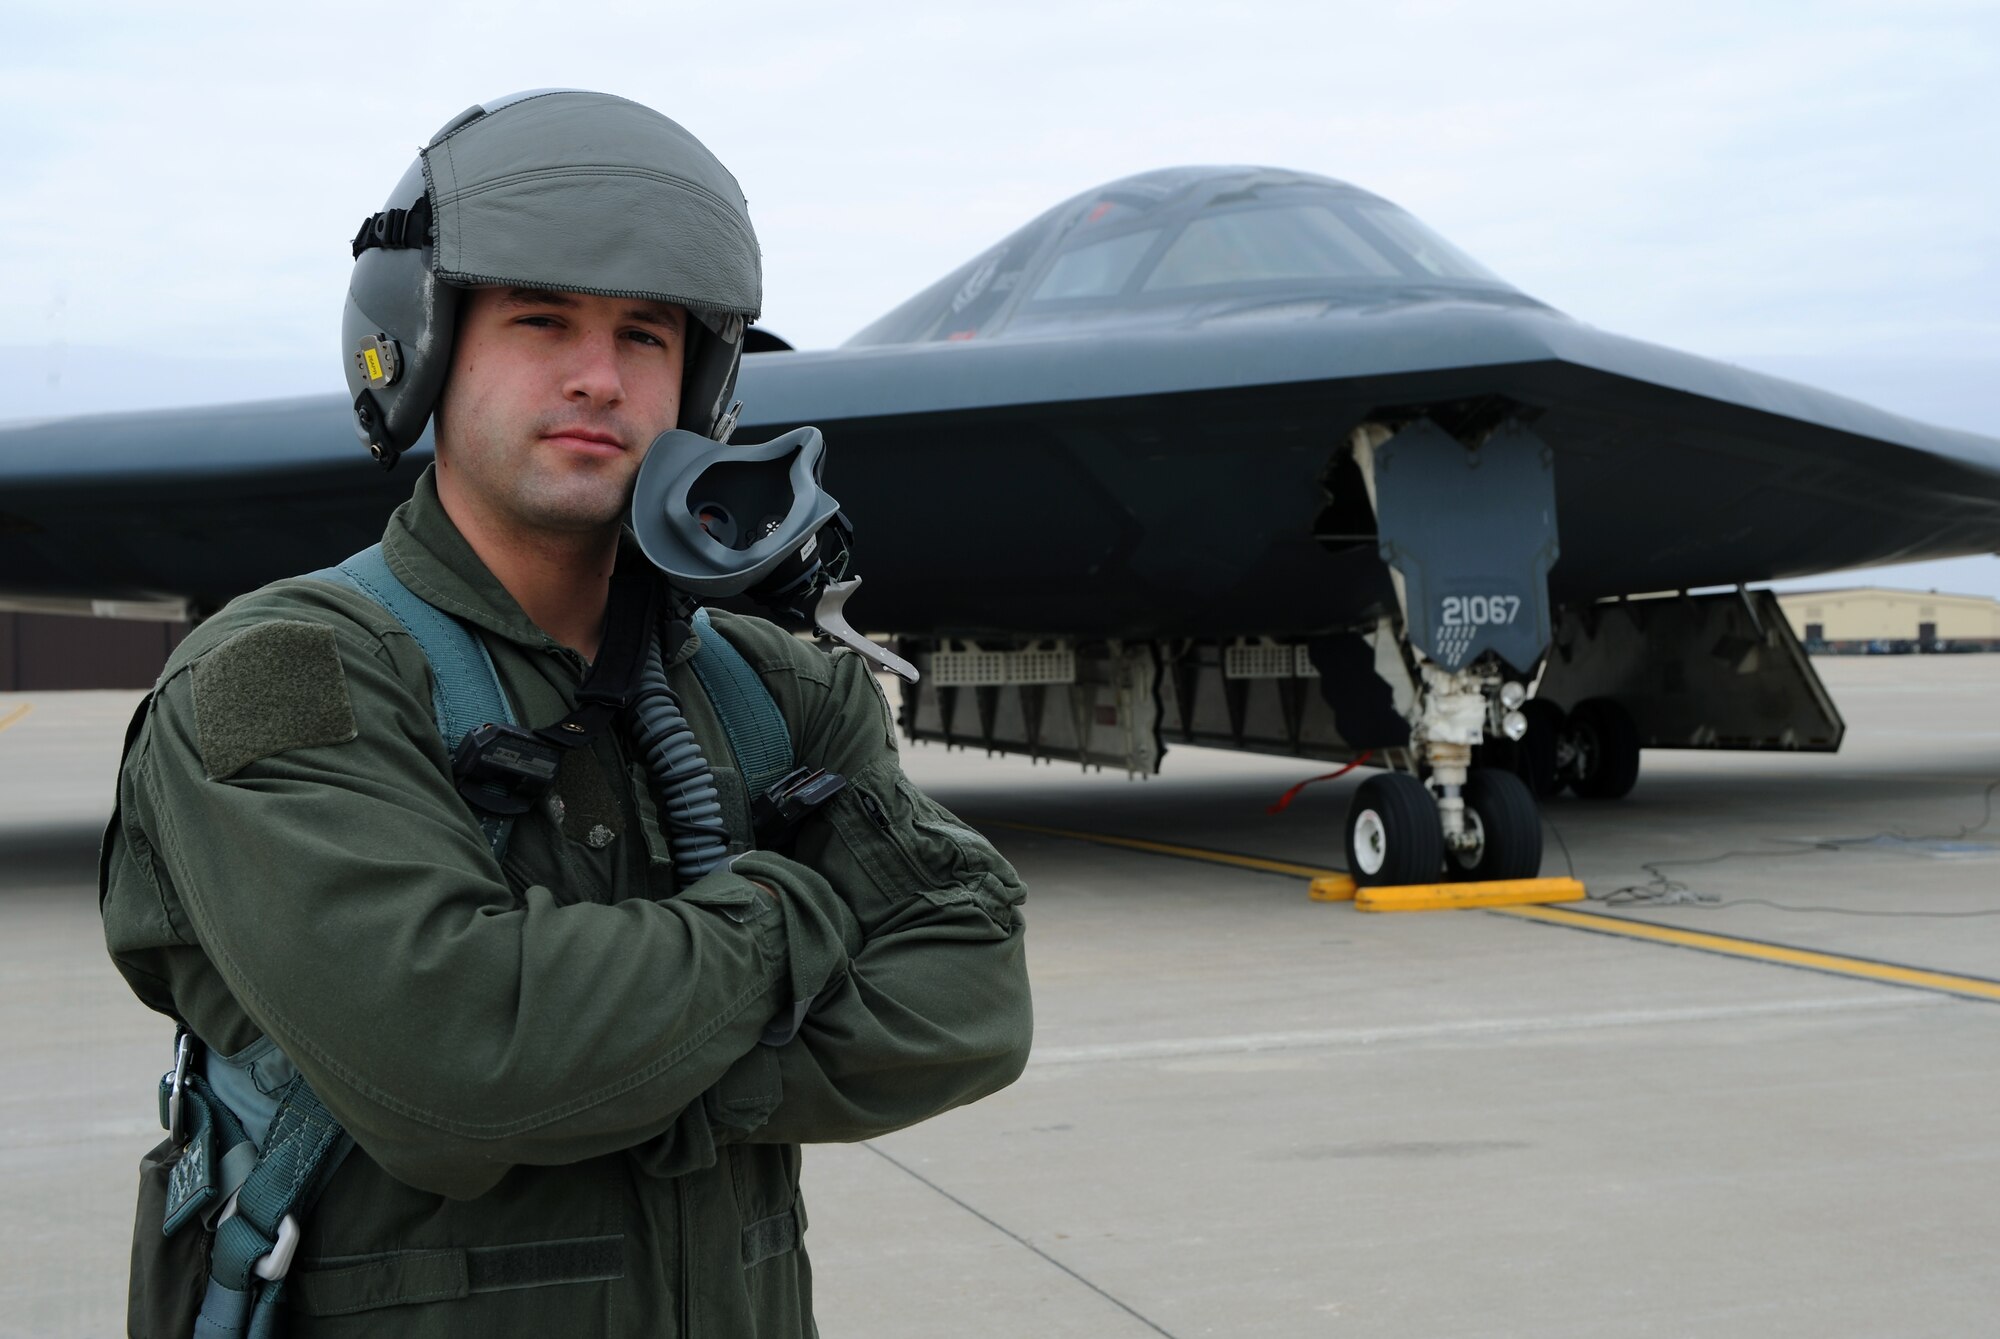 WHITEMAN AIR FORCE BASE, Mo. - Staff Sgt. Zachery Teague, 509th Aircraft Maintenance Squadron, stands in front of a B-2 Stealth Bomber March 13 after he has received the first enlisted incentive flight in a B-2. Sergeant Teague received this flight for being named the 2008 509th Maintenance Group Crew Chief of the Year. (U.S. Air Force Photo / Airman 1st Class Carlin Leslie)